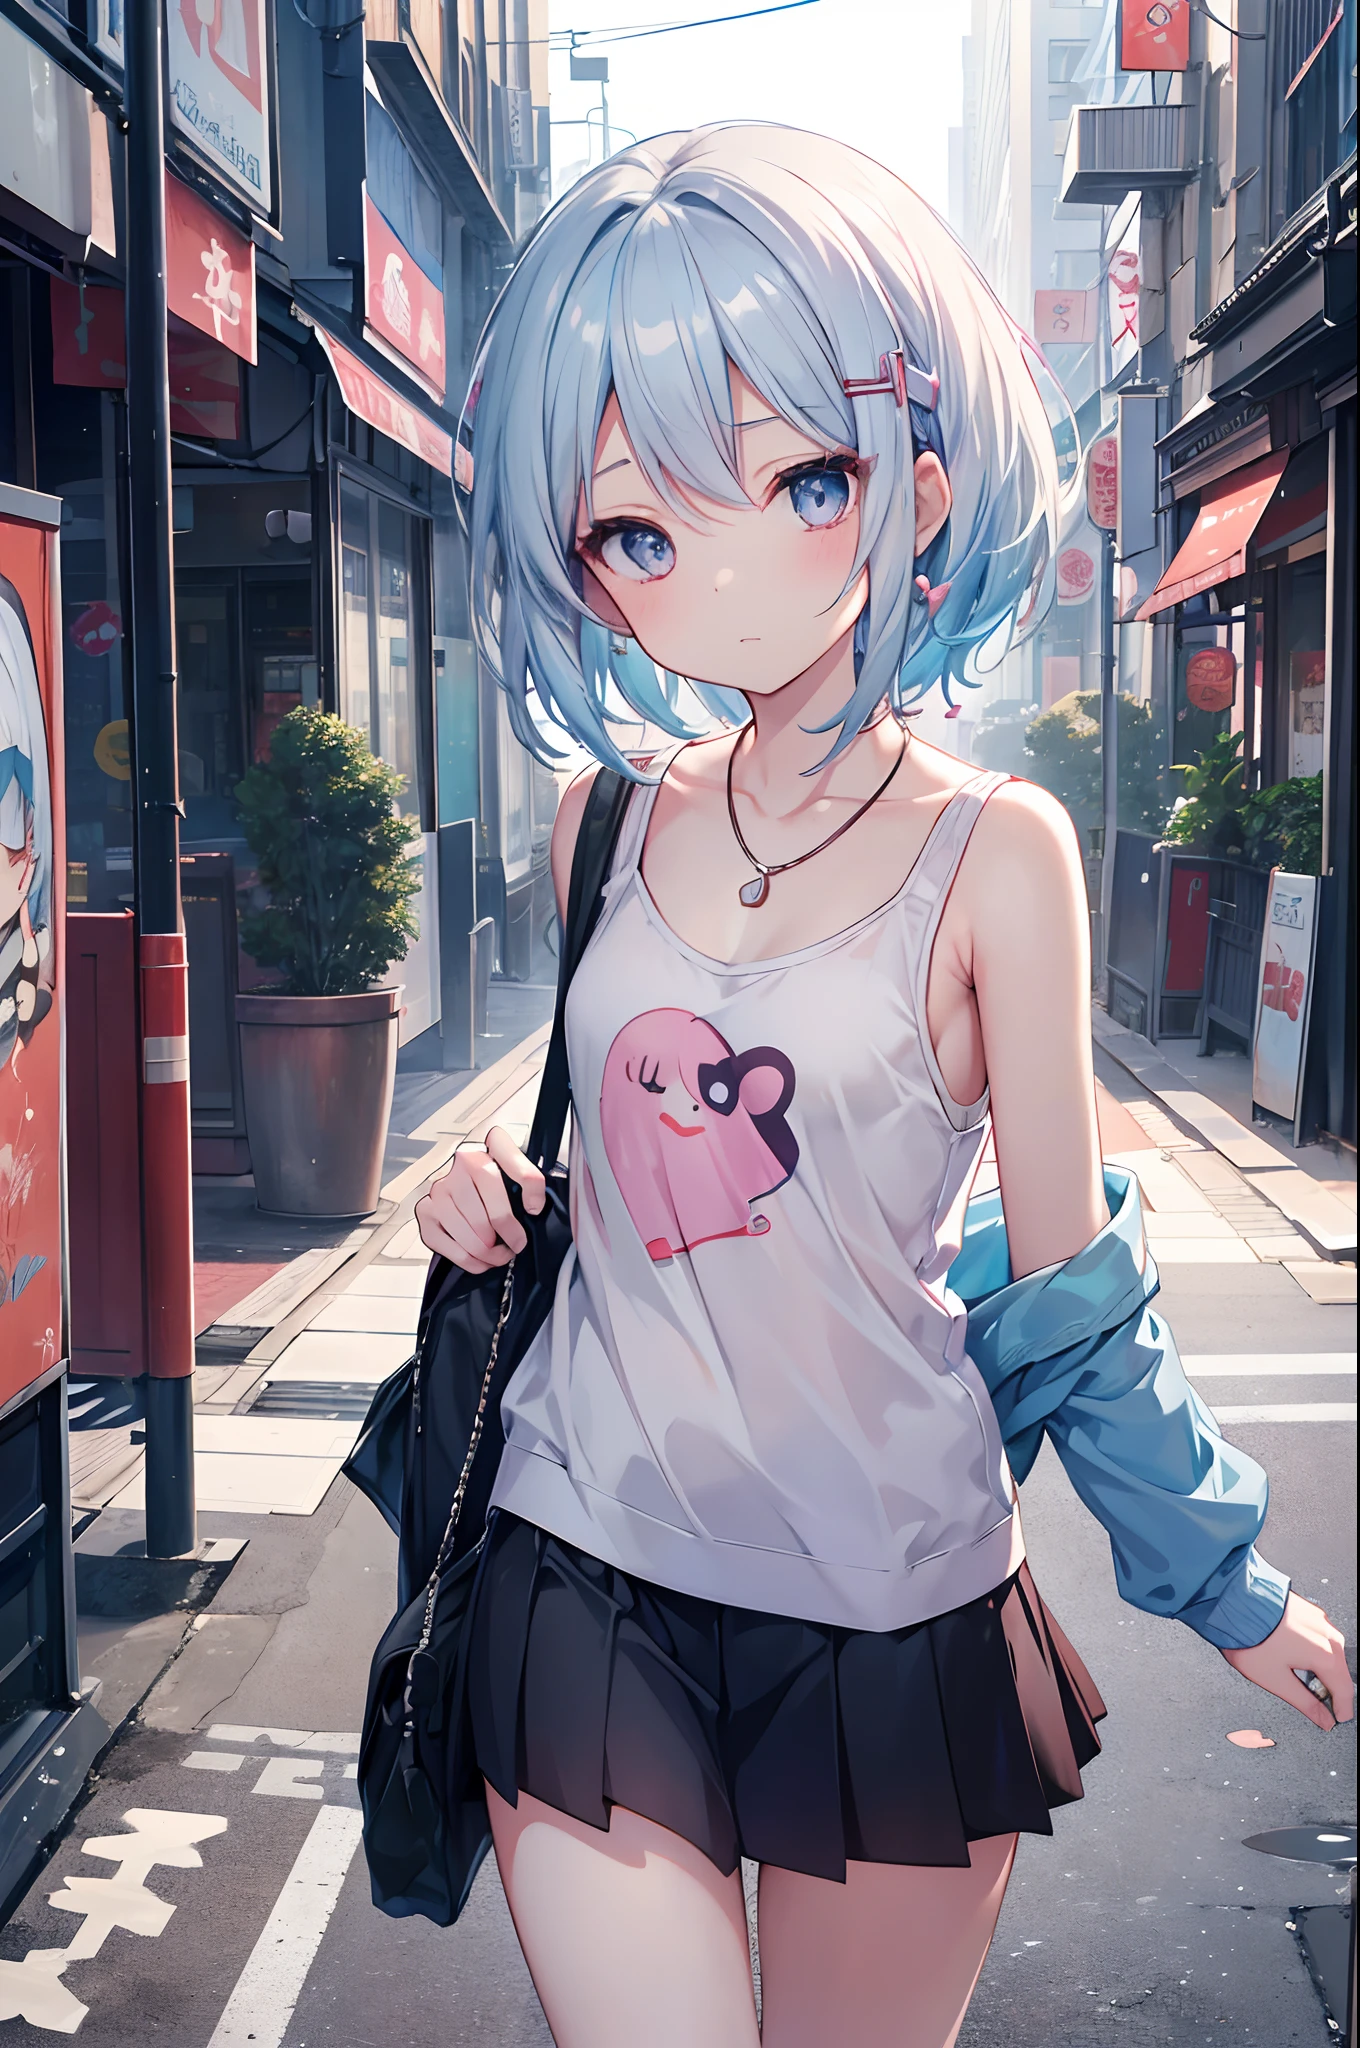 (masutepiece, Best Quality:1.2), 1girl in, Solo, Cute, kawaii, digitalart、Aimei、(long, Beautiful, Blue hair.flowing in the wind)、Short tank top、a miniskirt、Urban hustle and bustle、Meeting up for a date、Colorful cyberpunk city background,during daytime, Embarrassed expression, Silver hair(Short)、glistning skin、Small-faced beauty, Heart-shaped necklace,Low Angle Lens、perfect-composition、Perfect light and shadow delicacy、8K